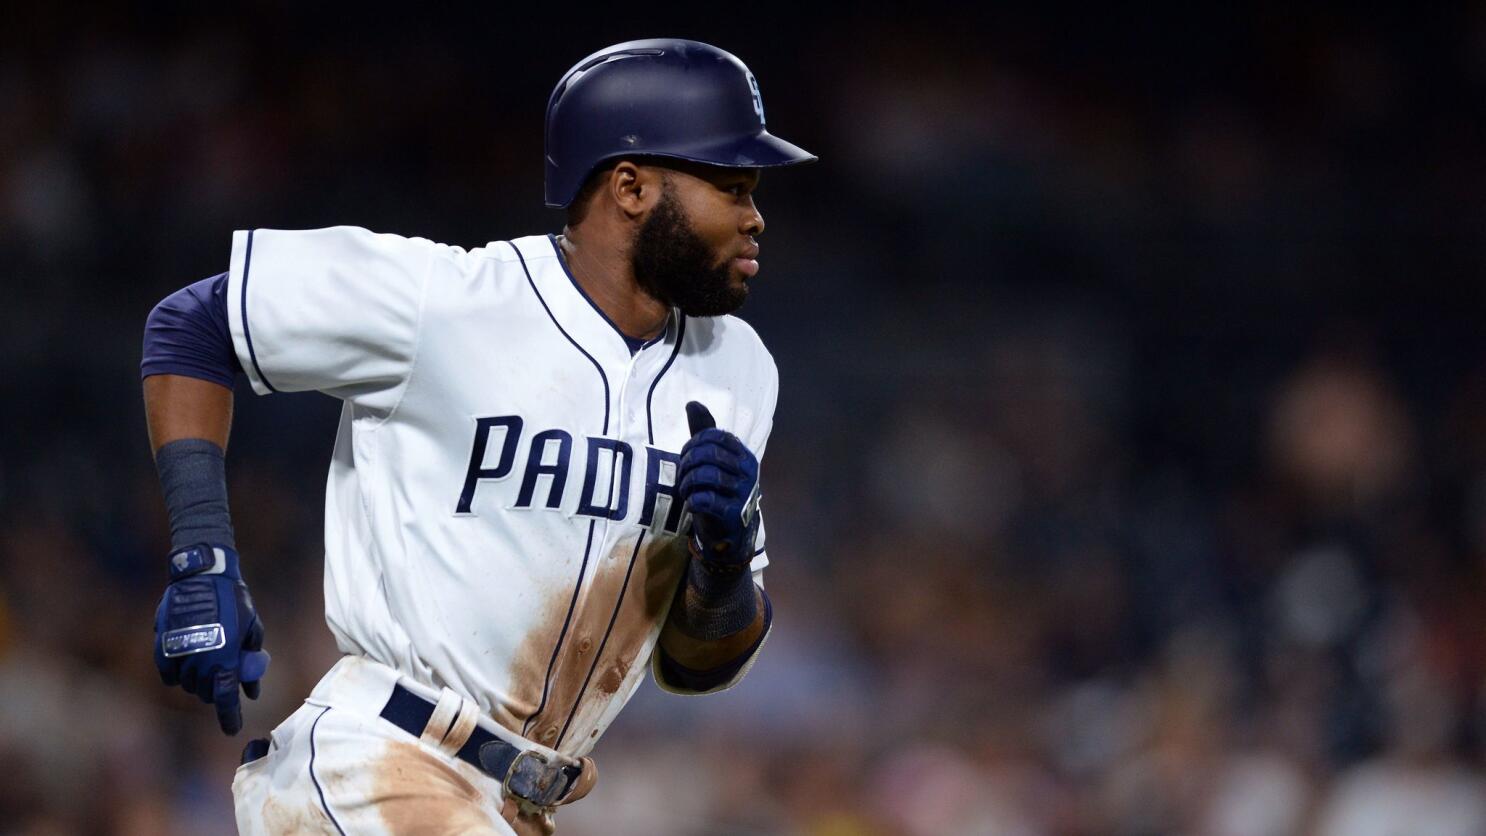 With a rebuilding season ending, Padres' owners look to 2018 and